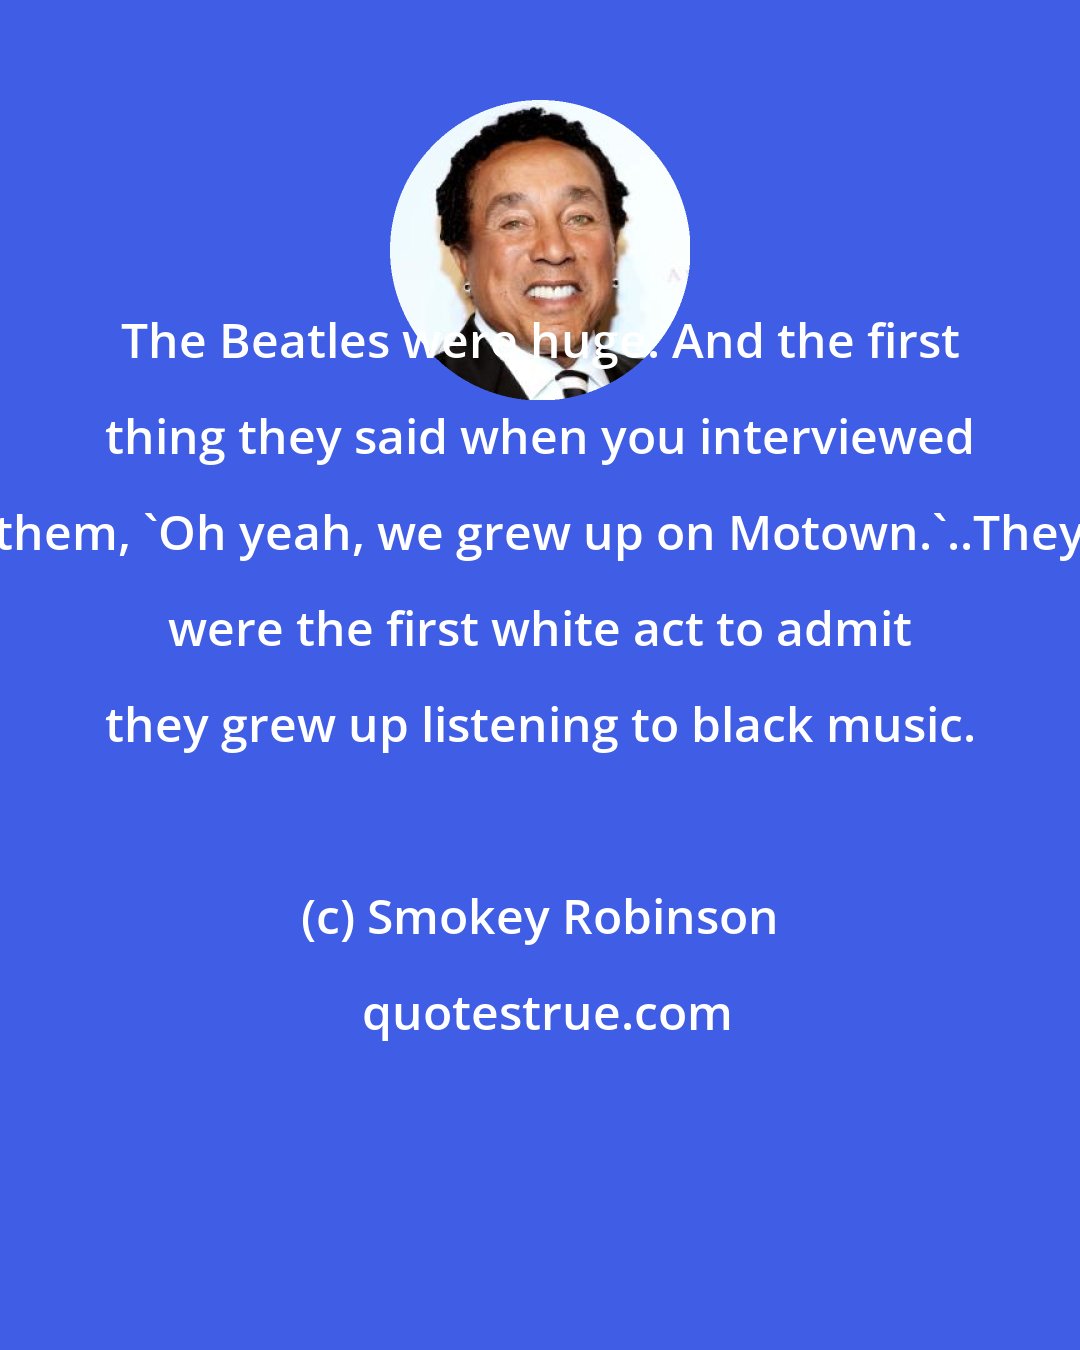 Smokey Robinson: The Beatles were huge. And the first thing they said when you interviewed them, 'Oh yeah, we grew up on Motown.'..They were the first white act to admit they grew up listening to black music.